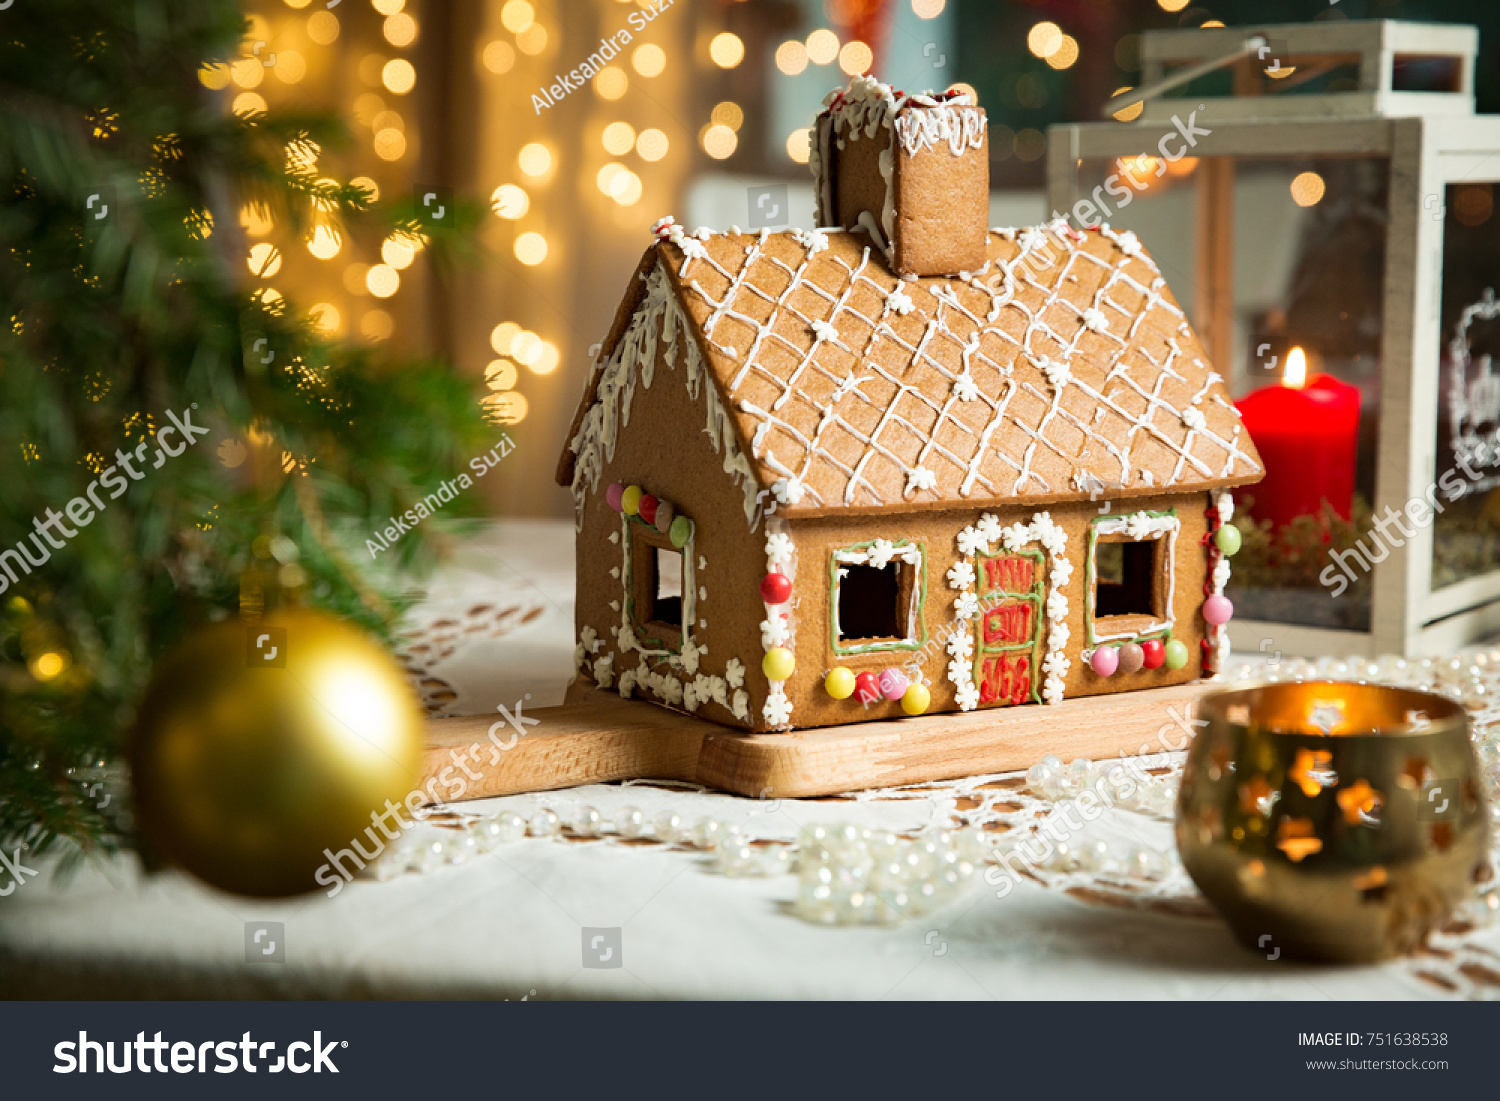 Little gingerbread house with glaze standing on table with tablecloth and decorations, candles and lanterns. Living room with lights and Christmas tree. Holiday mood #751638538